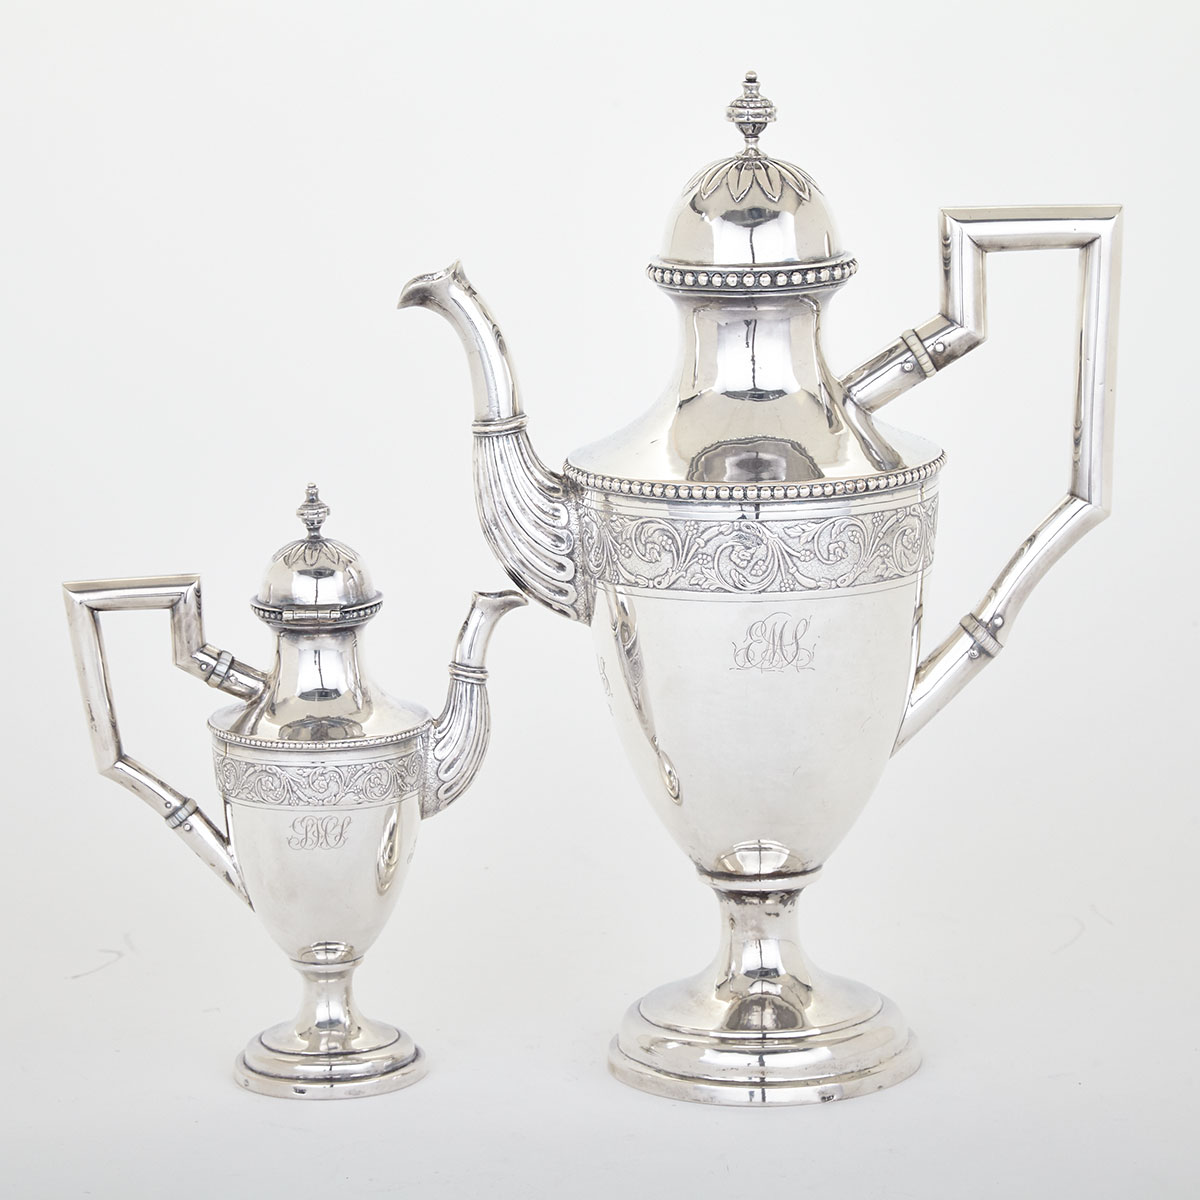 German Silver Coffee Pot and Hot Water Pot, Georg Christian Friederich Temmler, Augsburg, late 18th century